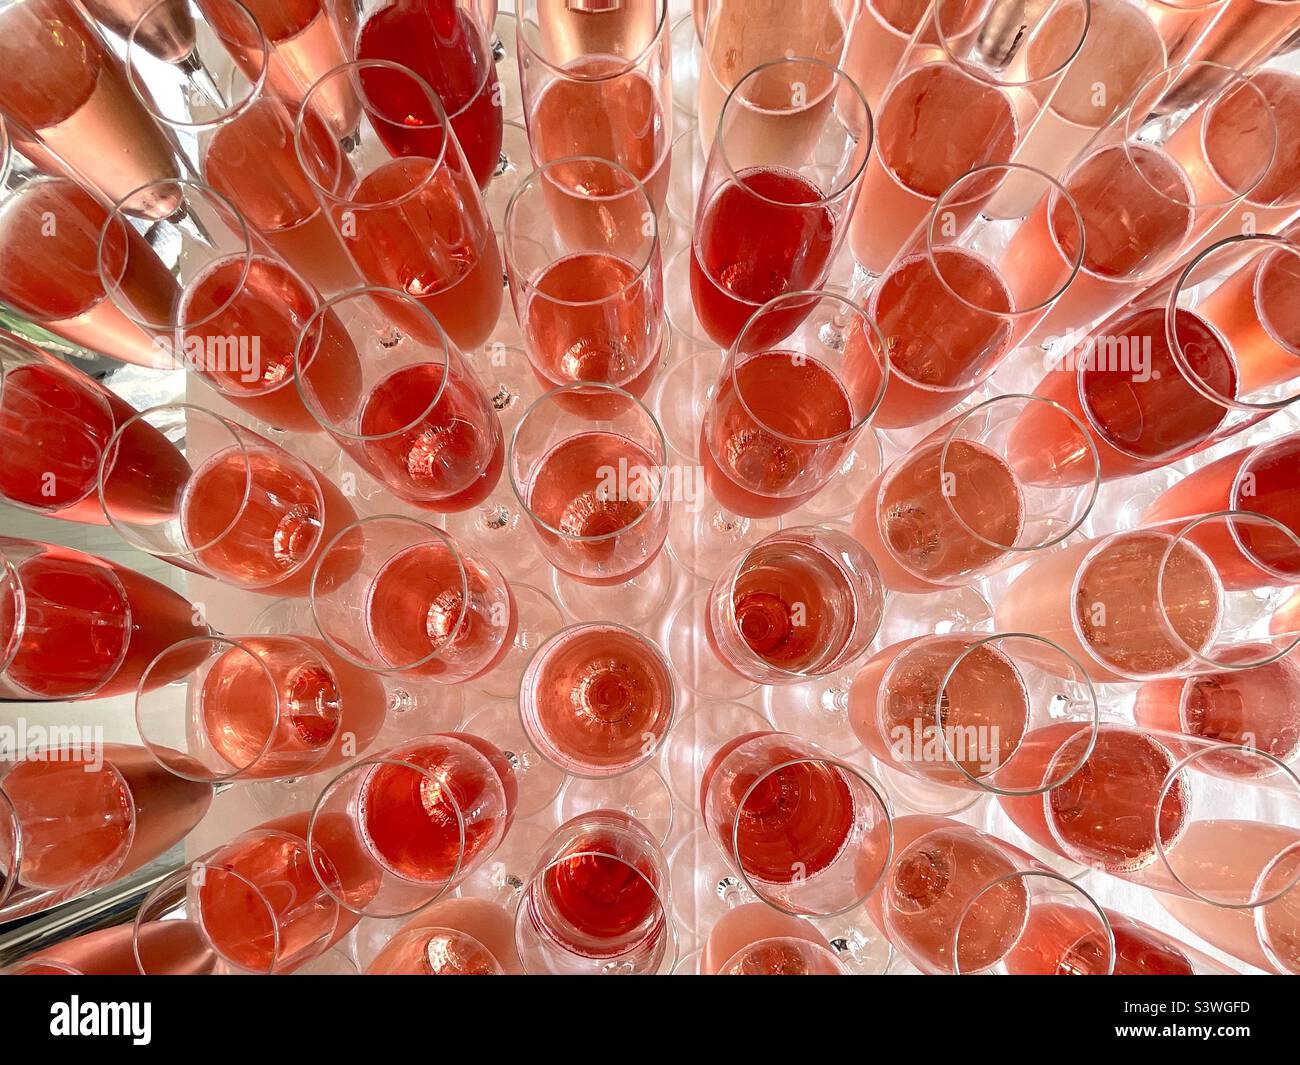 Close up view from above of champagne flute glasses with rose wine Stock Photo